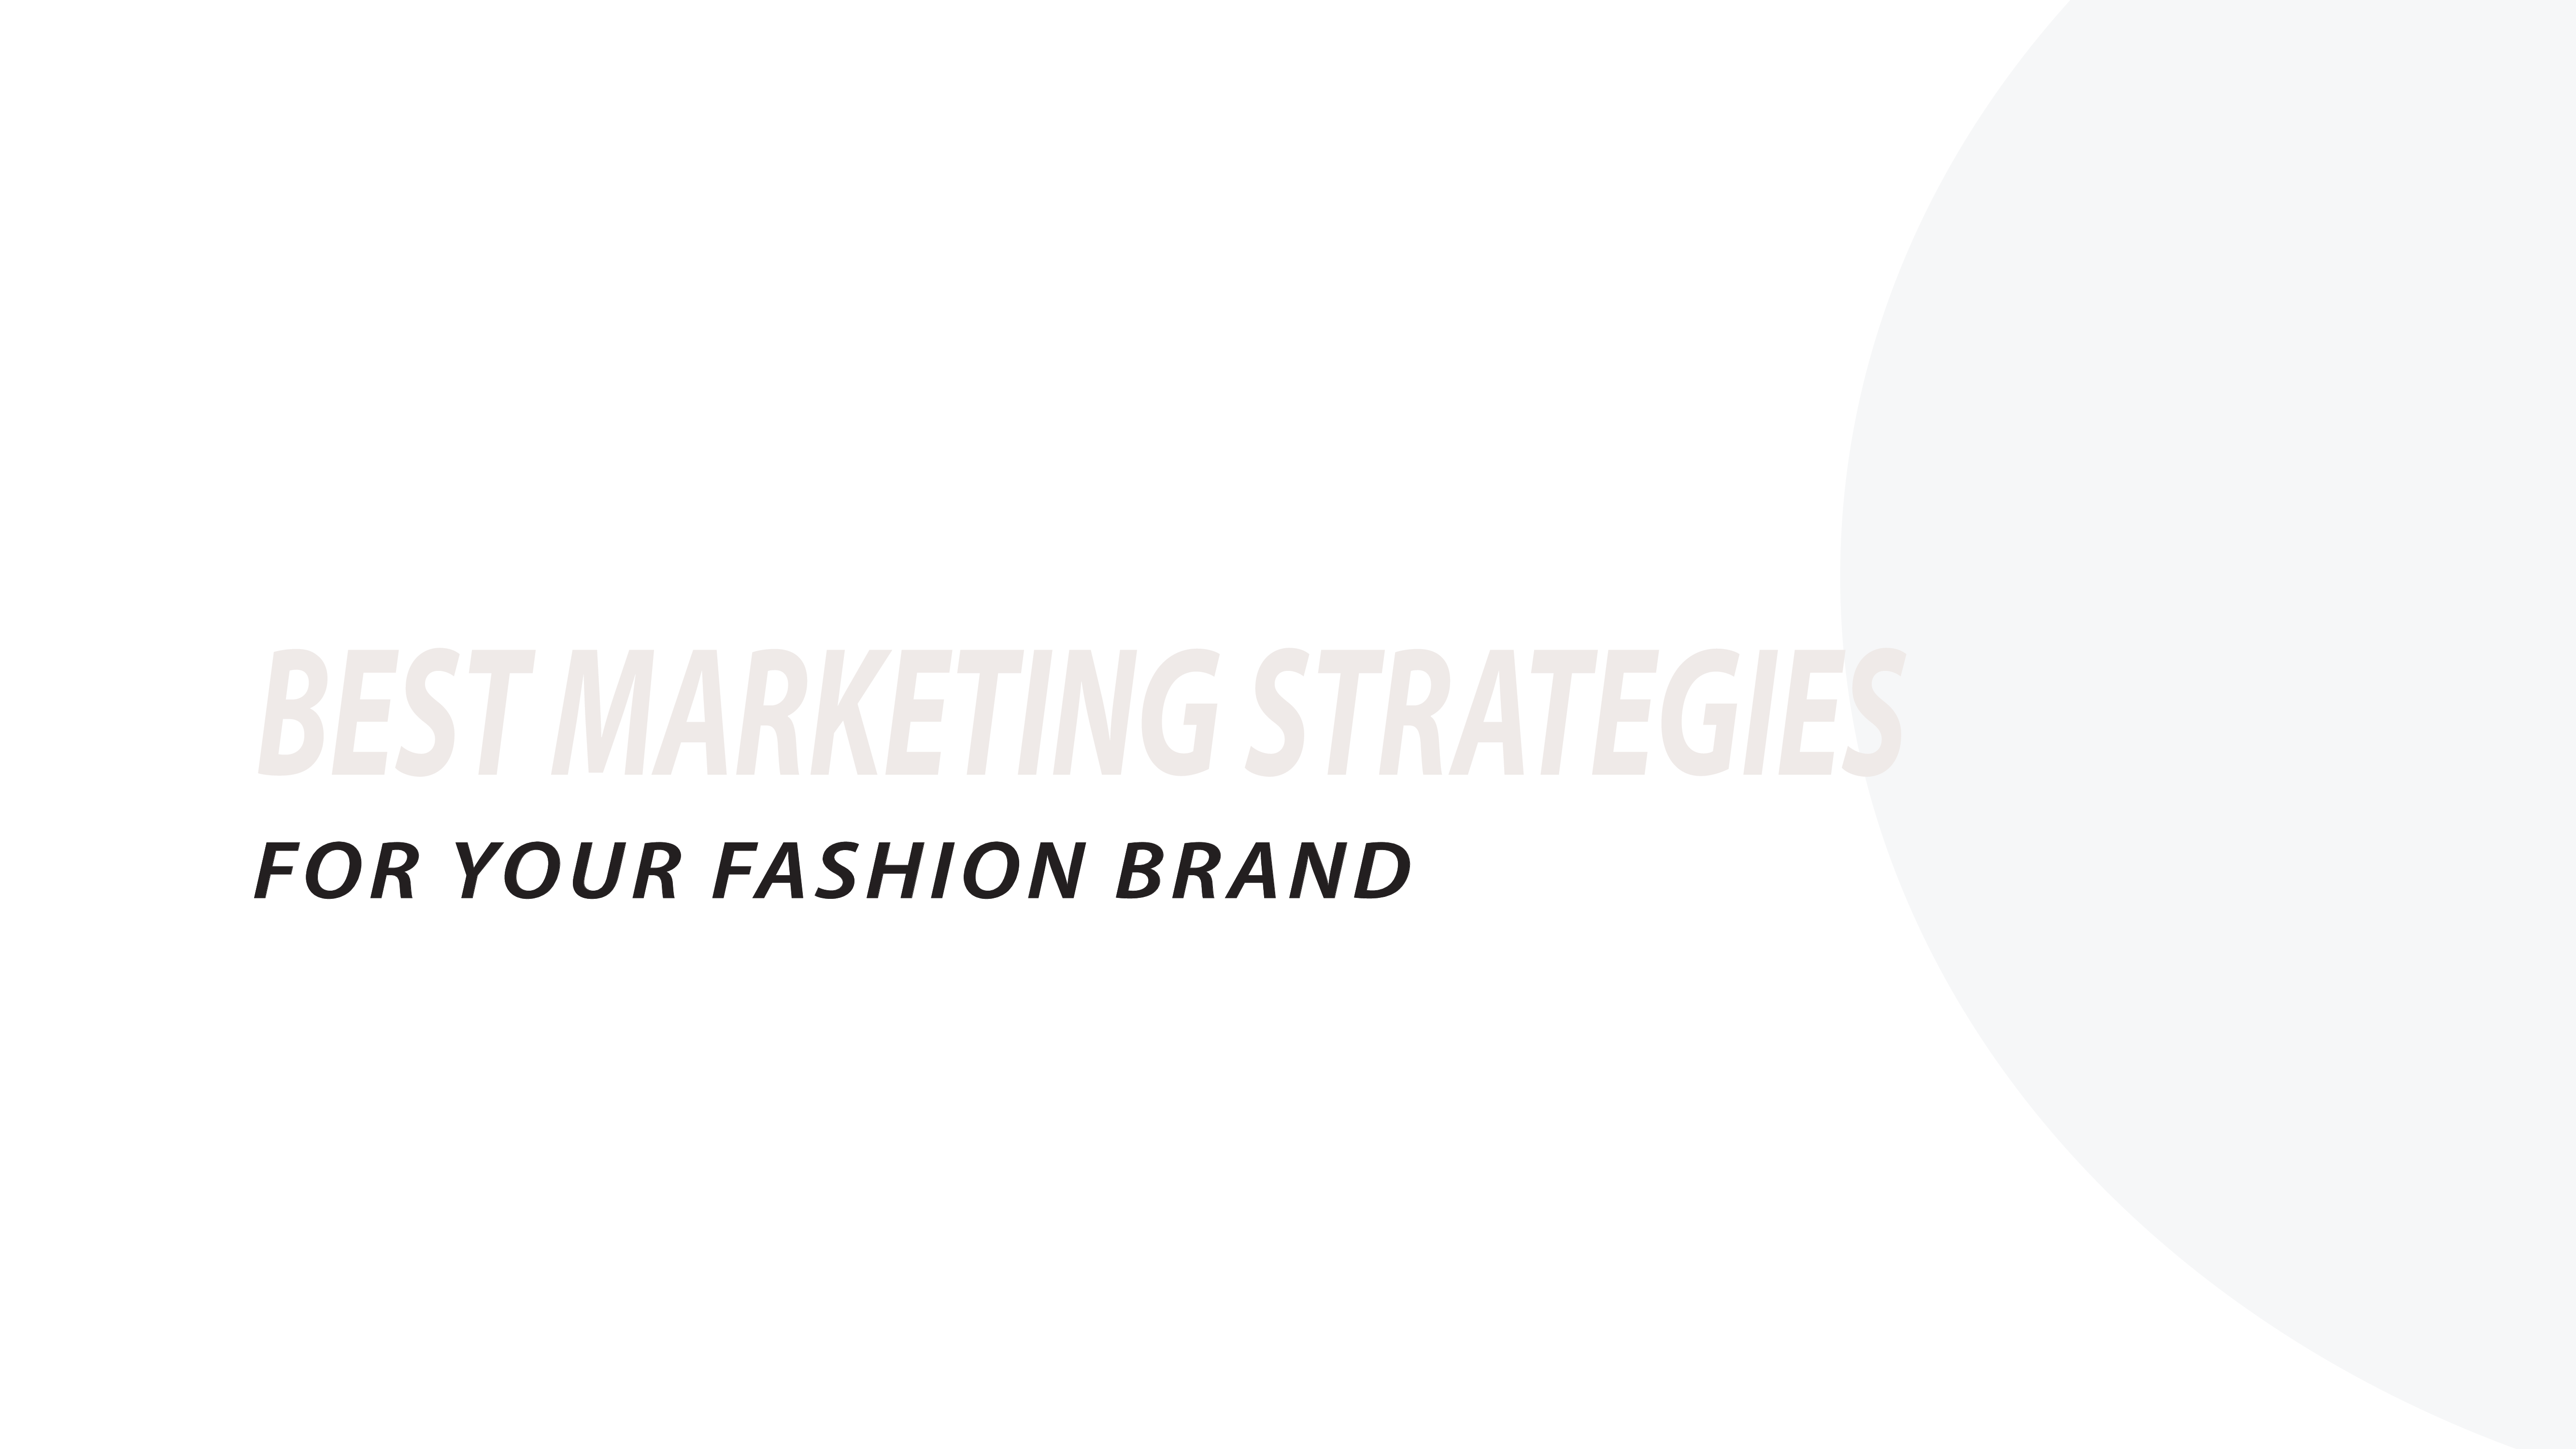 Best marketing strategies for your fashion brand